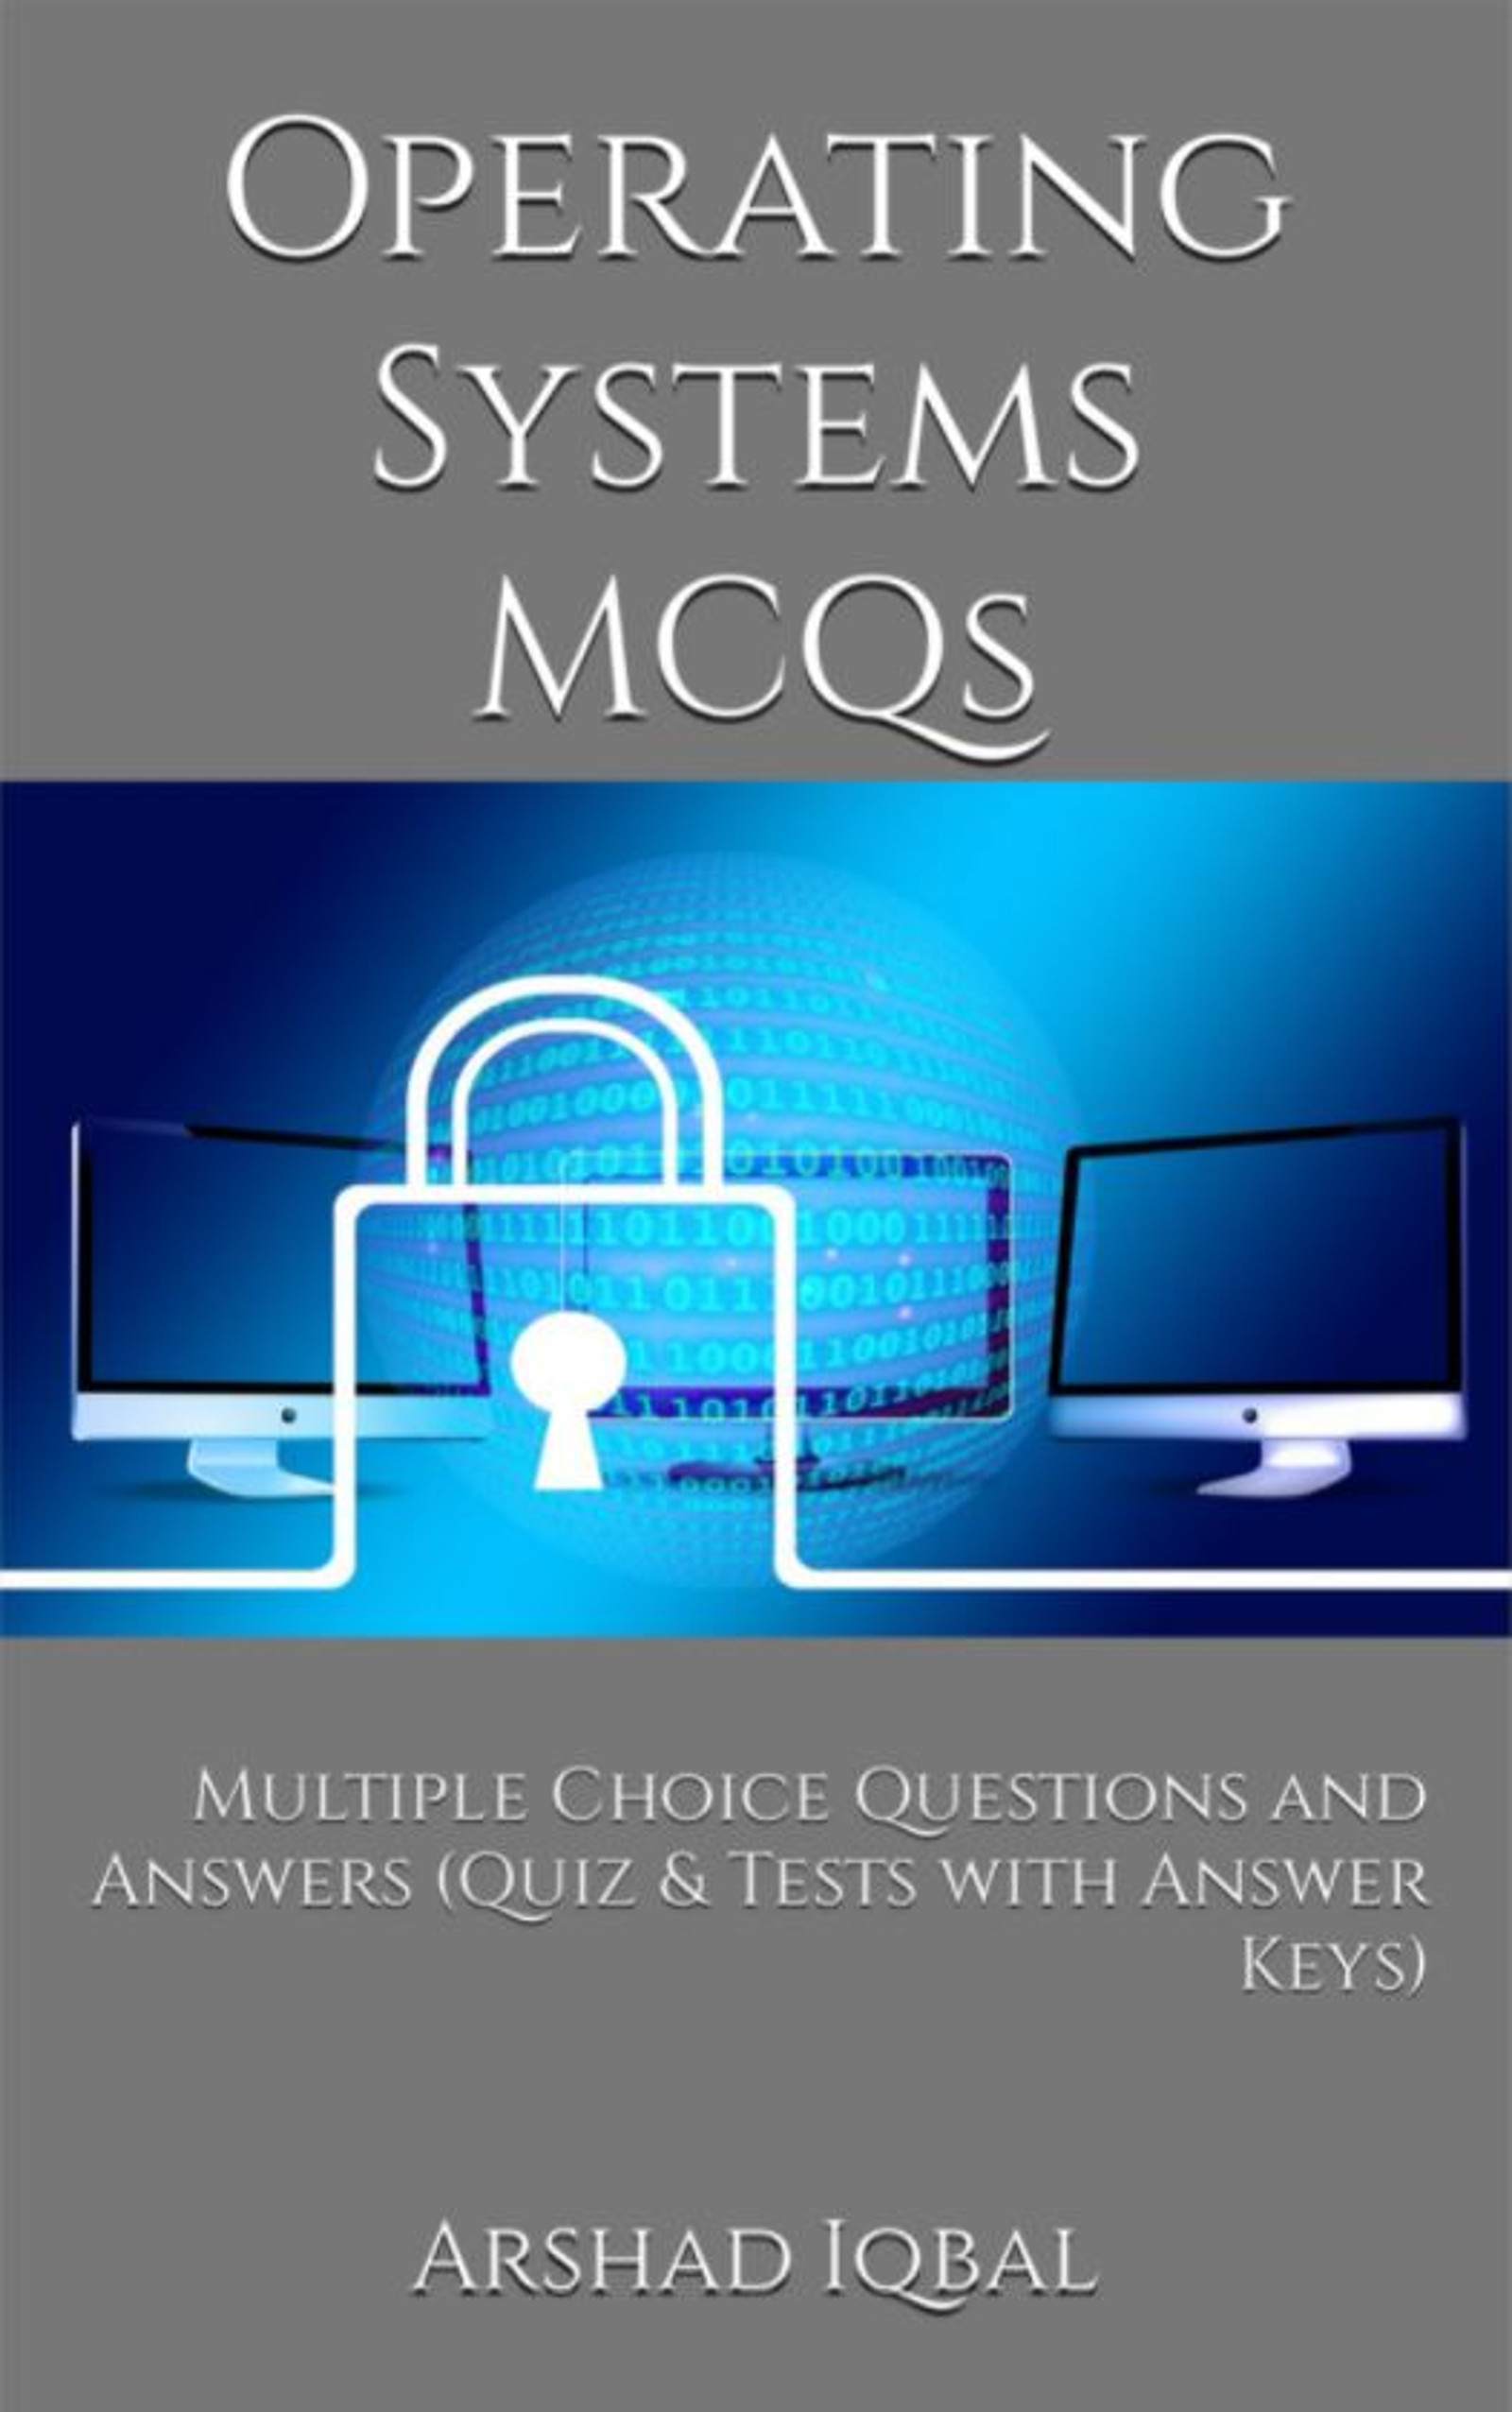 Operating Systems MCQ Book PDF